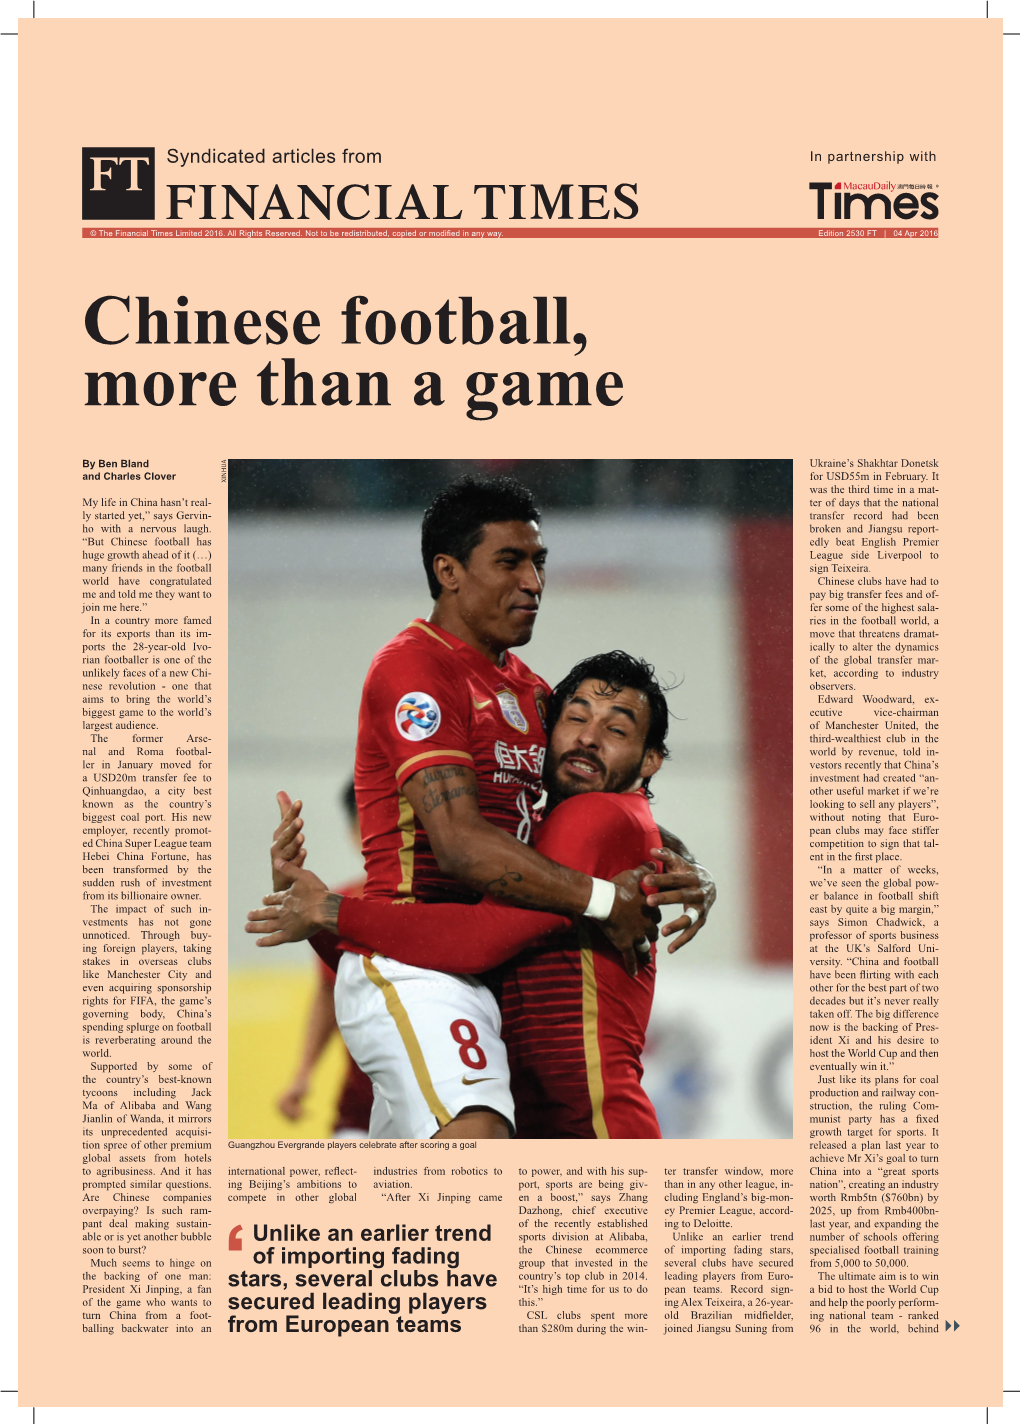 Chinese Football, More Than a Game